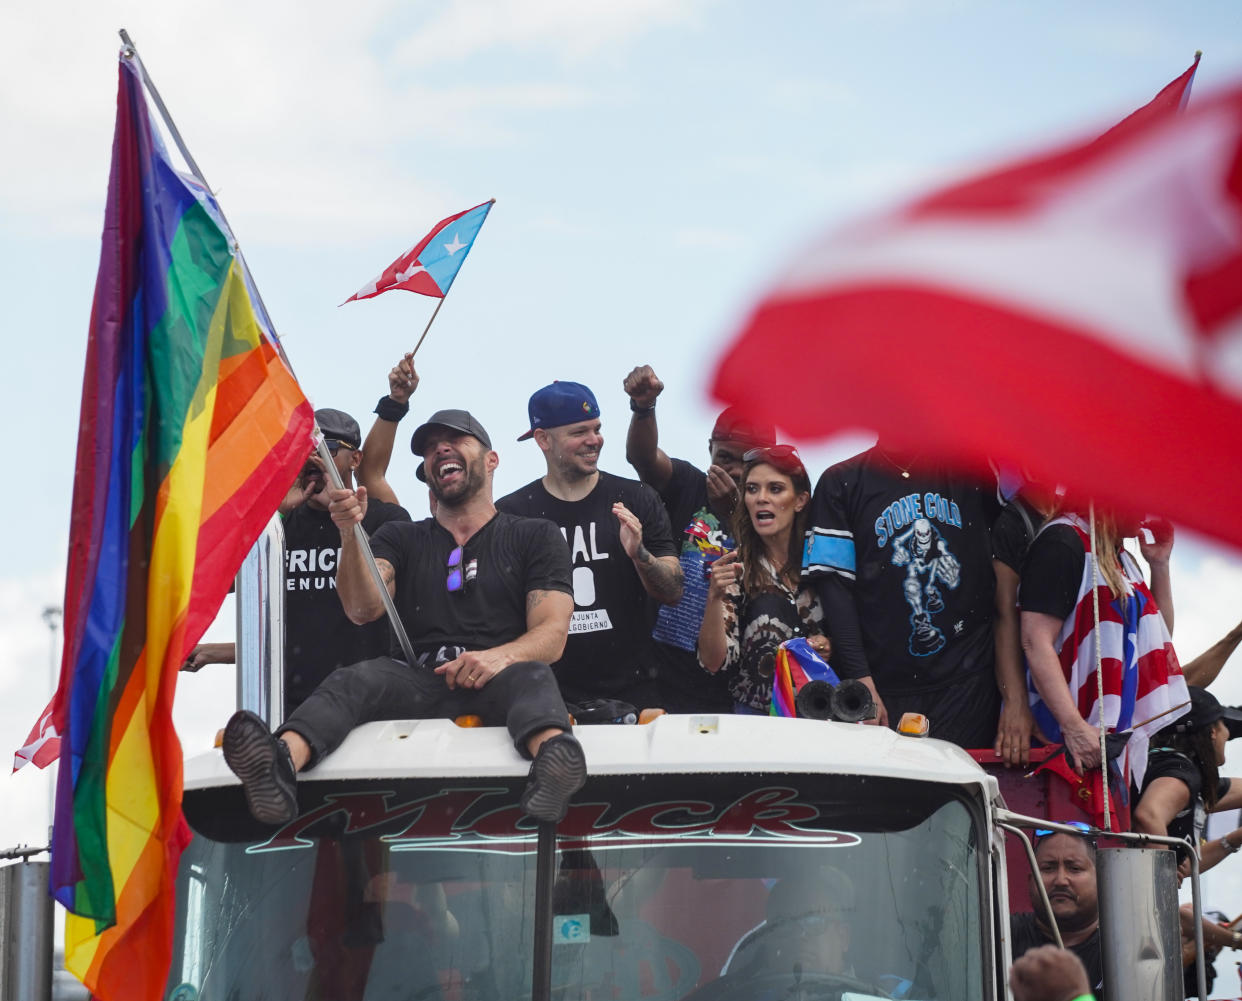 SAN JUAN, PUERTO RICO - JULY 22:  Singer Ricky Martin, sitting left, waves a pride flag as demonstrators walk down  the Las Americas Expressway, the biggest highway in Puerto Rico  as part of a massive march  on July 22, 2019 in San Juan, Puerto Rico. There have been calls for the Governor to step down after it was revealed that he and top aides were part of a private chat group that contained among other messages misogynistic and homophobic messages. (Photo by Angel Valentin/Getty Images)